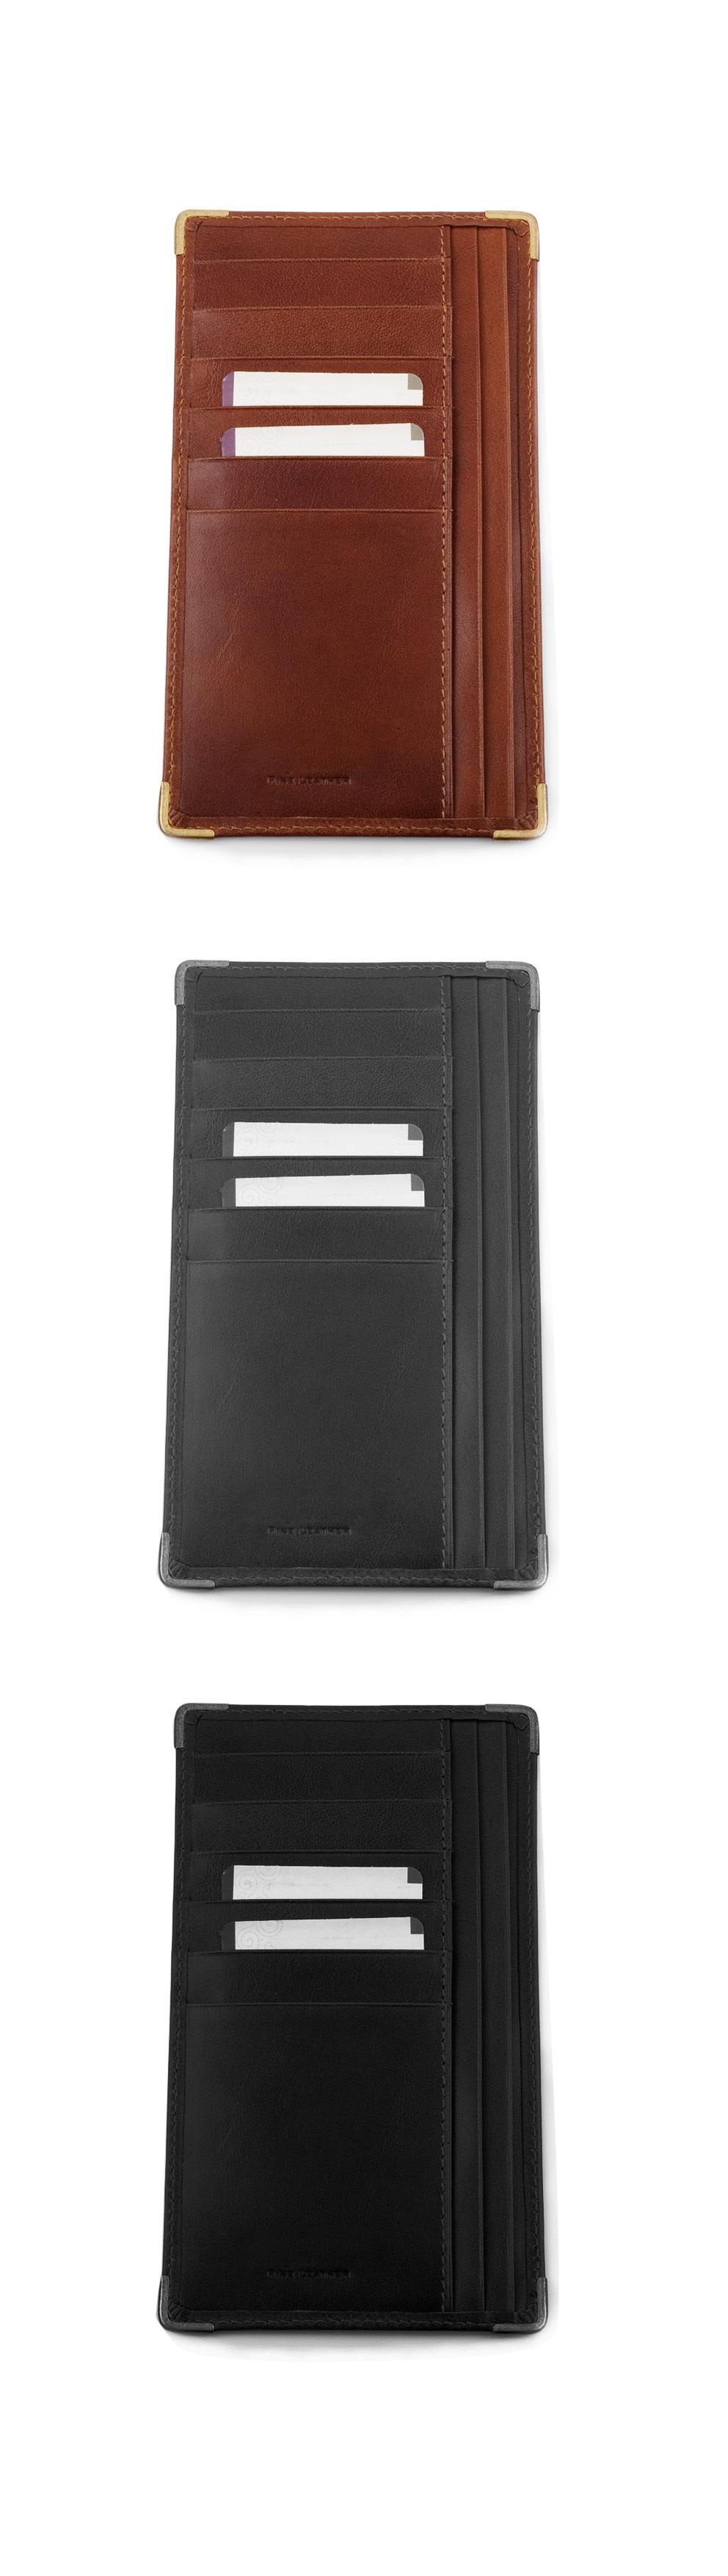 GENTS TALL SLIM TAN WALLET - Travel Elegantly crafted by hand from the finest calf leather, this tall, ultra slim wallet is an essential element of any business repertoire. Size: L 17 cm, H 9.